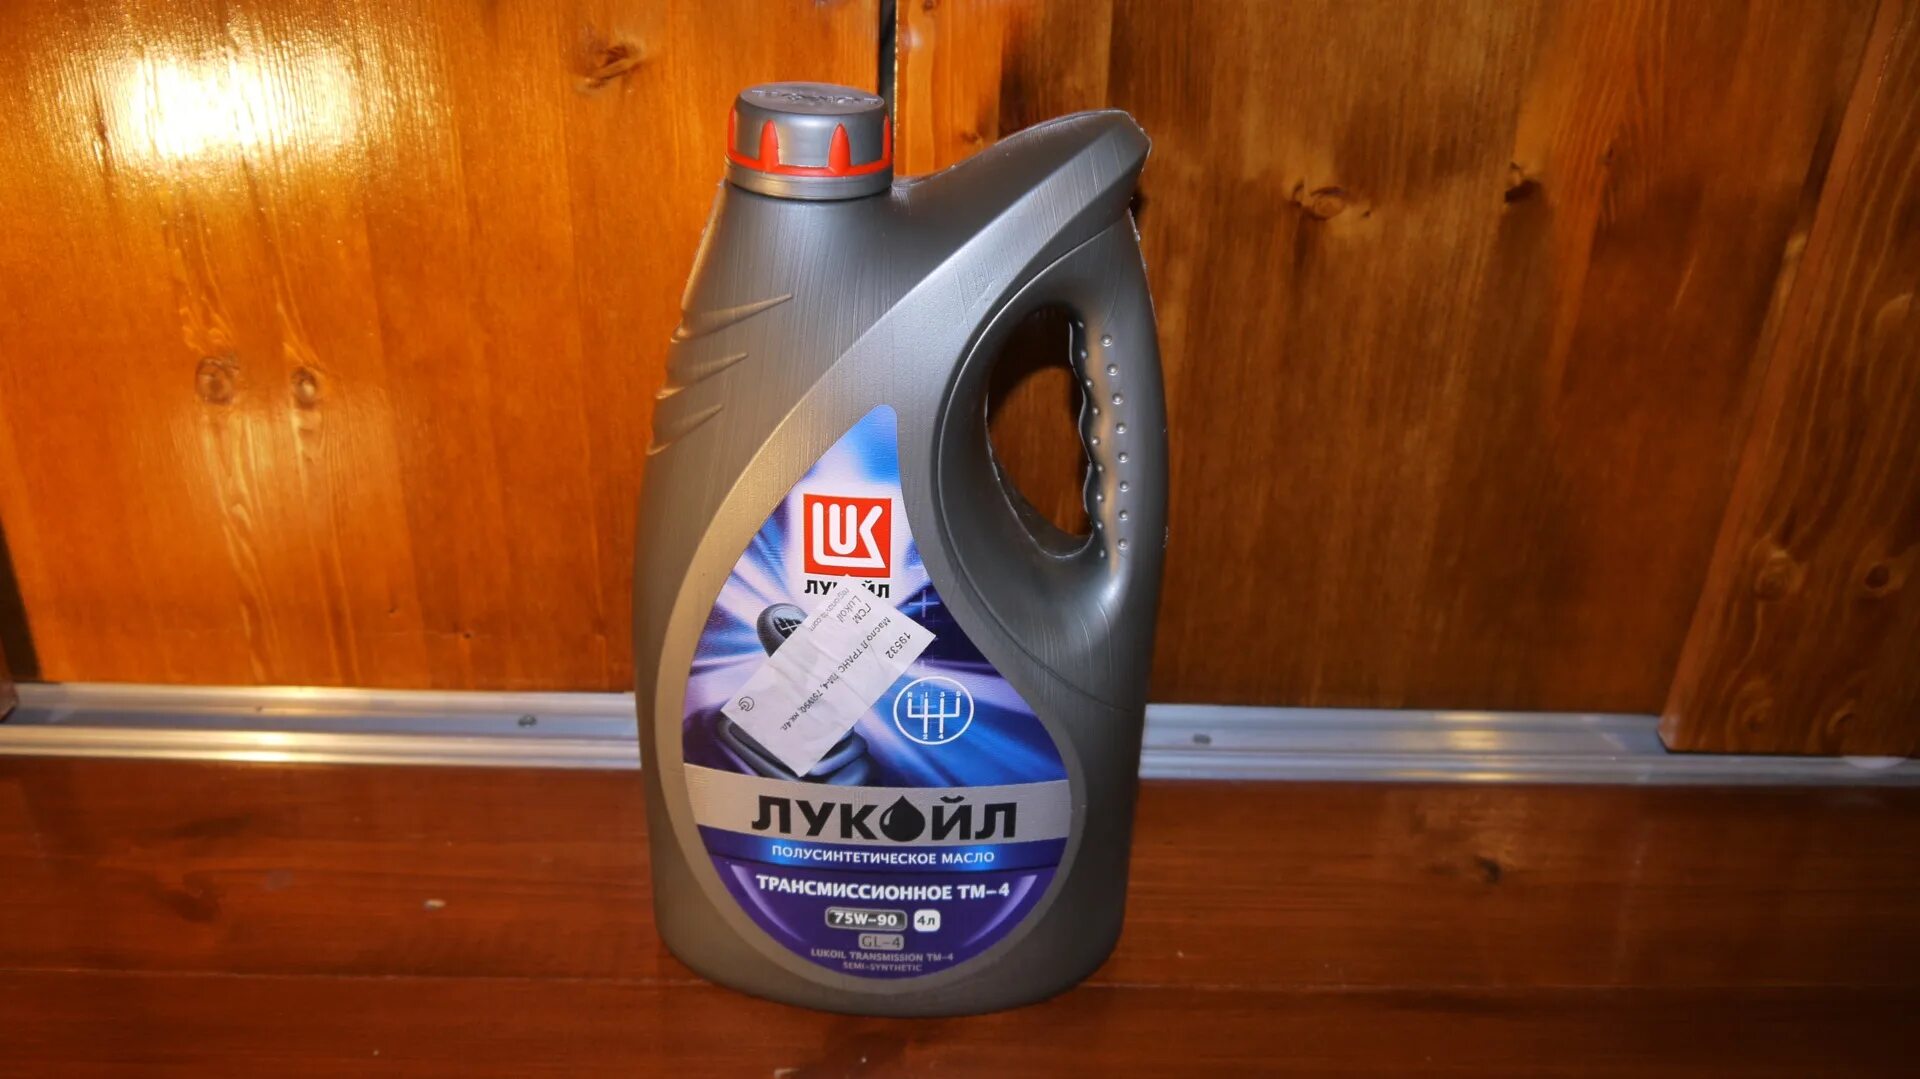 Масло лукойл 75w 90. Лукойл ТМ-4 75w-90 фф3. Лукойл ТМ 4. Lukoil 75w90 20л.